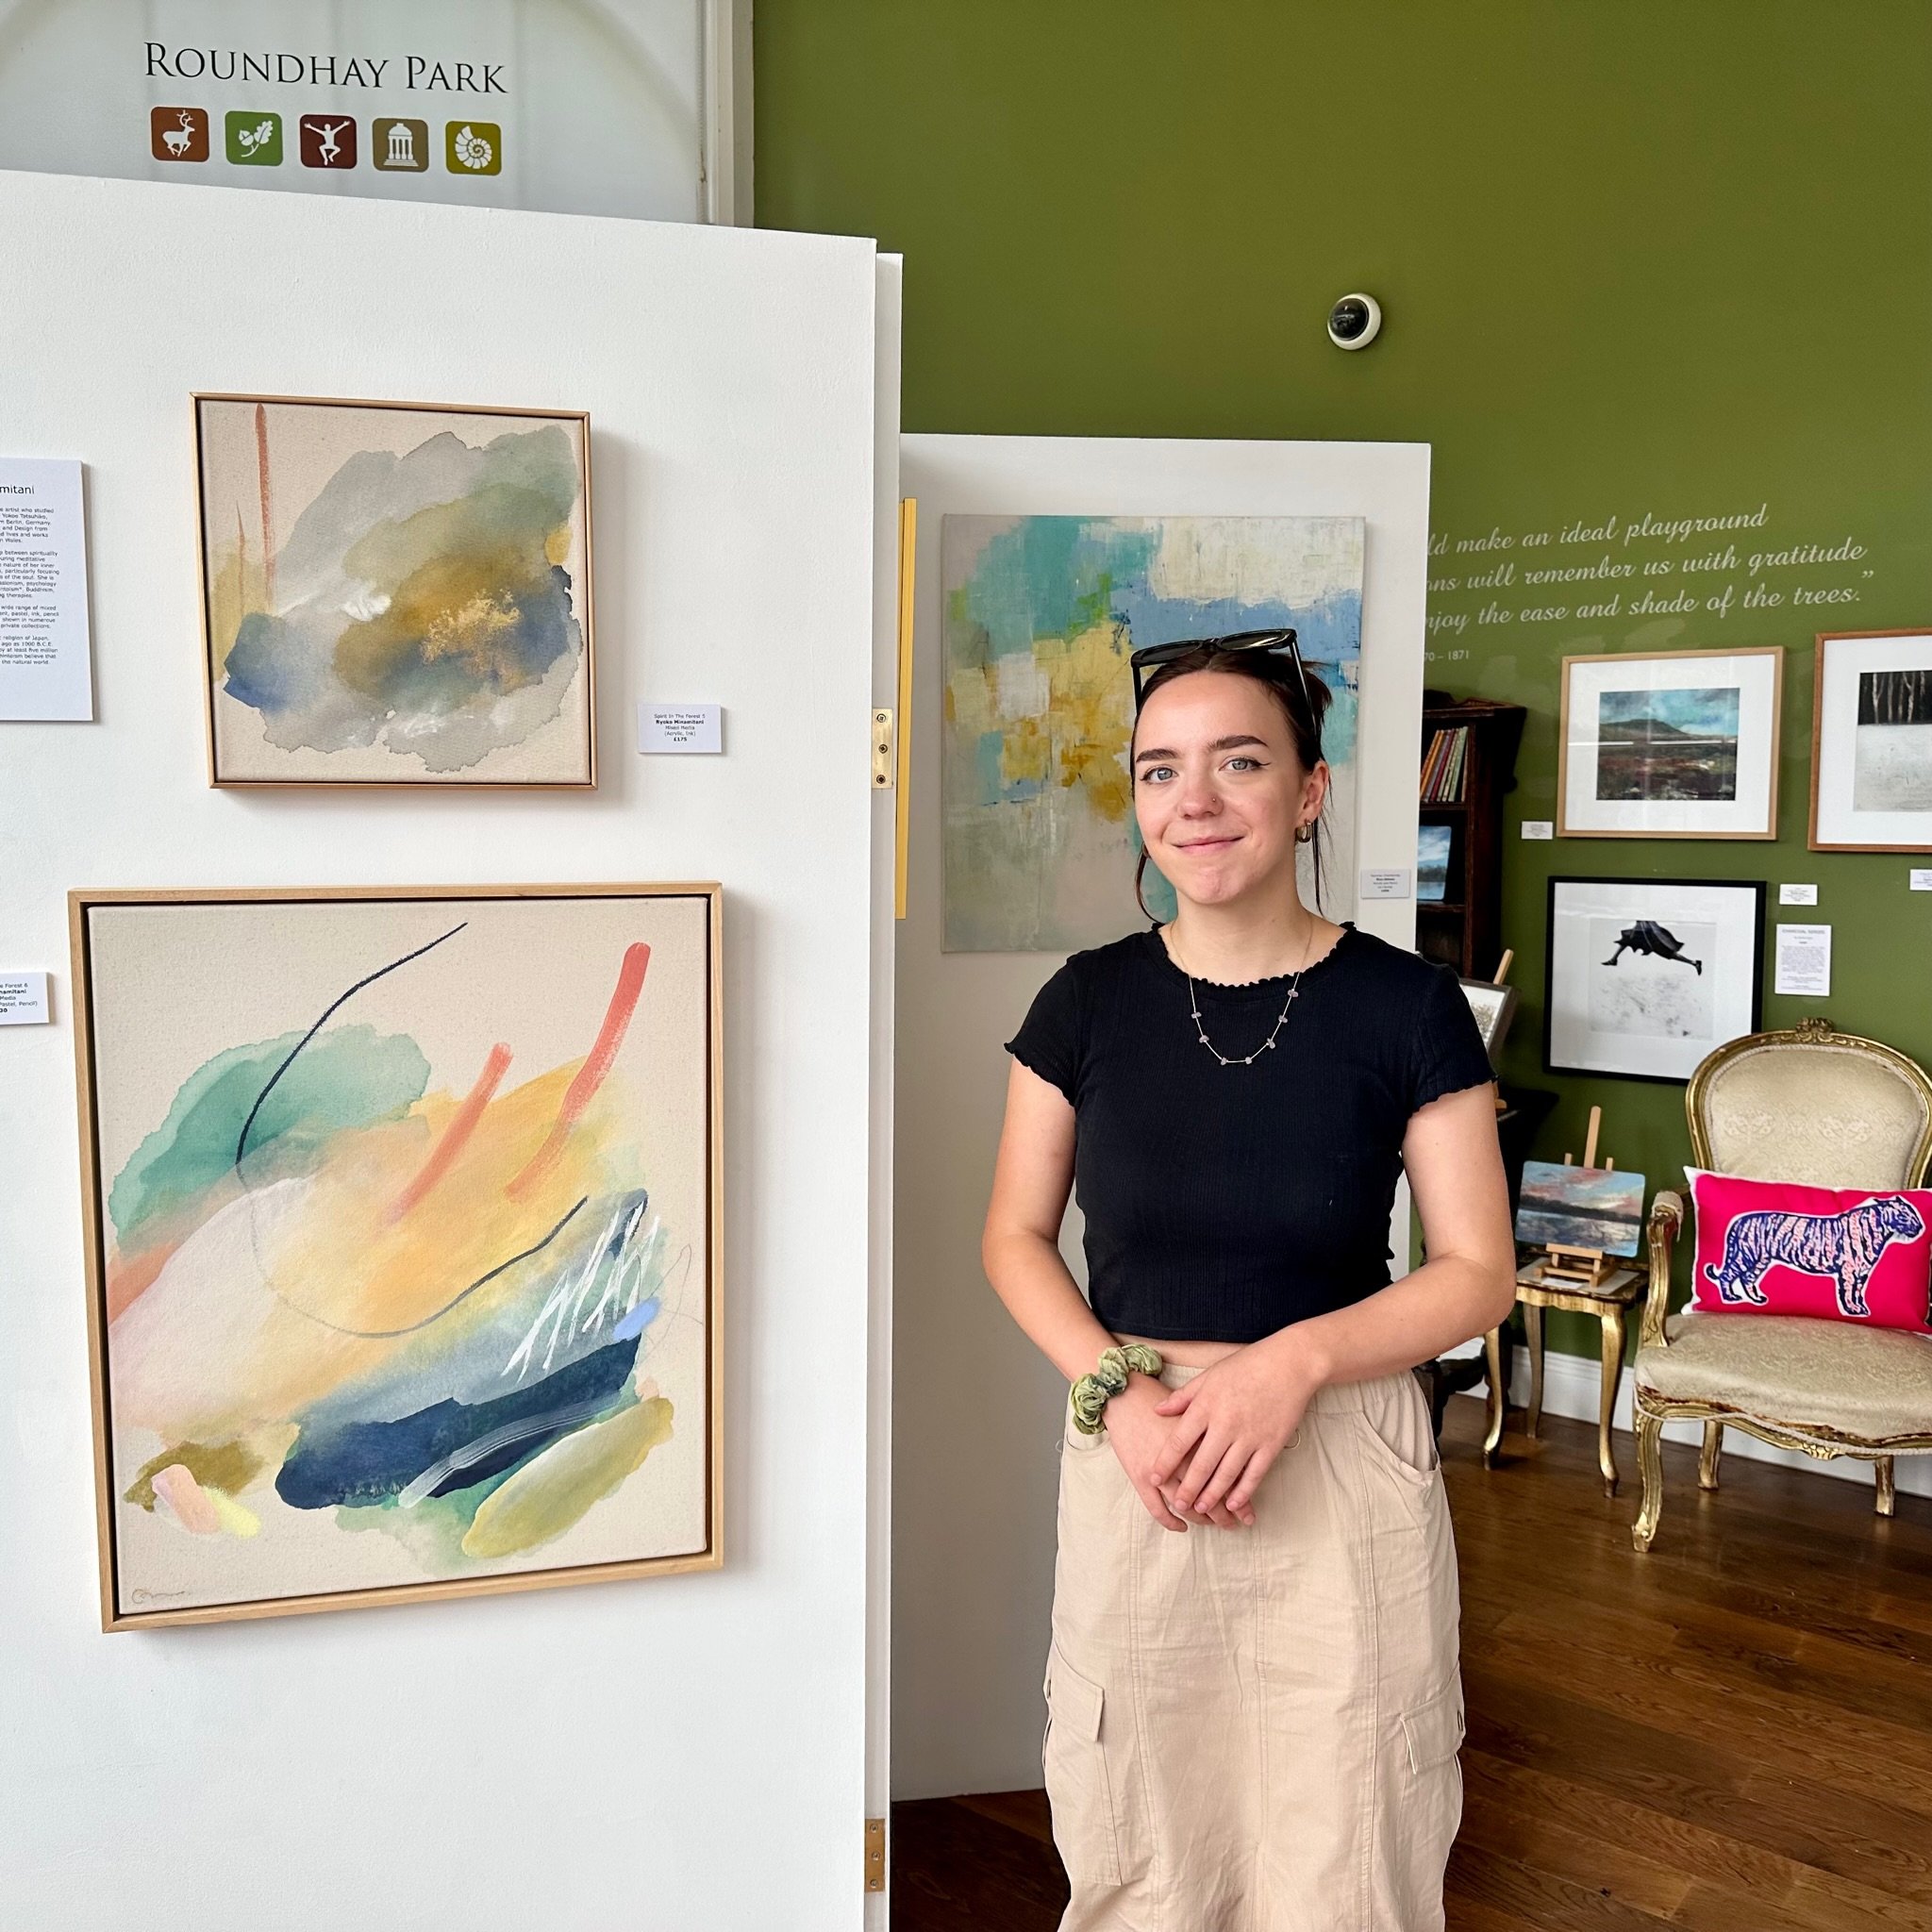 Meet the team at Art Roundhay Park 🌱

&quot;Hi I&rsquo;m Molly! I&rsquo;m at the gallery a few times a month, alongside freelancing for arts events and doing a bit of painting myself. 

I&rsquo;m really inspired by nature 🌿 so I love seeing all the